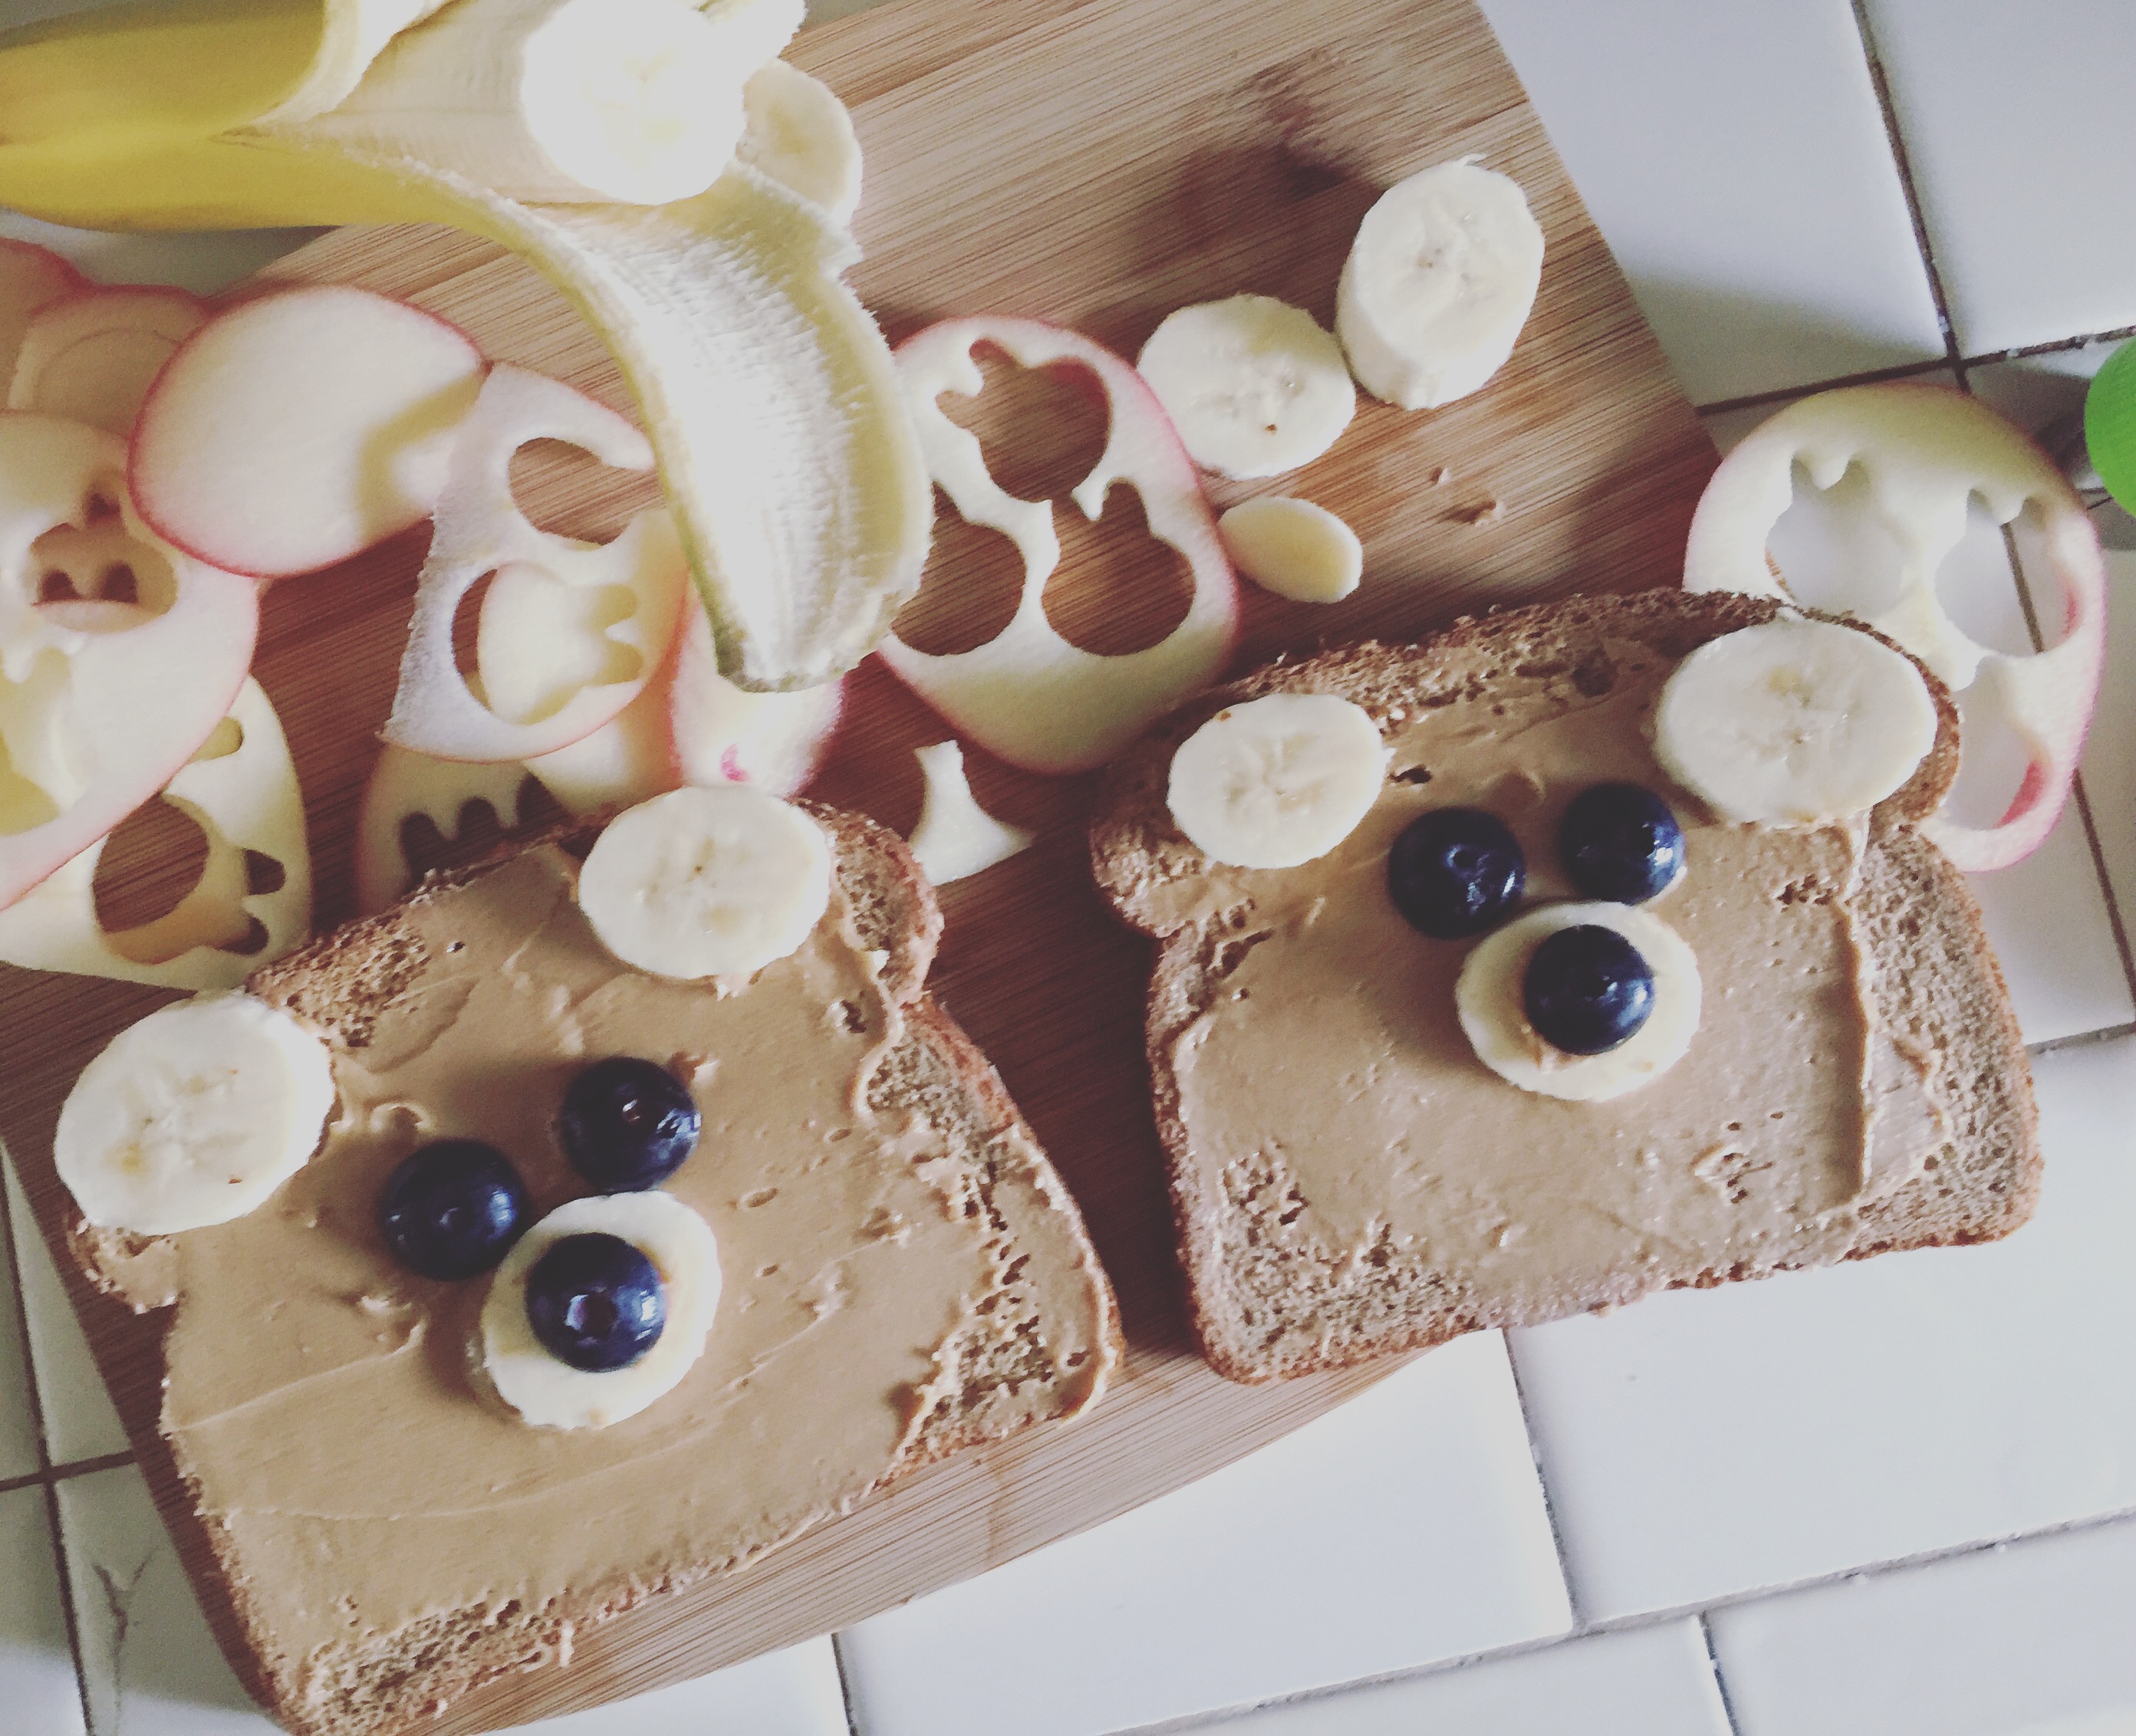 Peanut Butter Bear Toasts using bananas and blueberries. With Apple Bunnies carved with a cookie cutter.